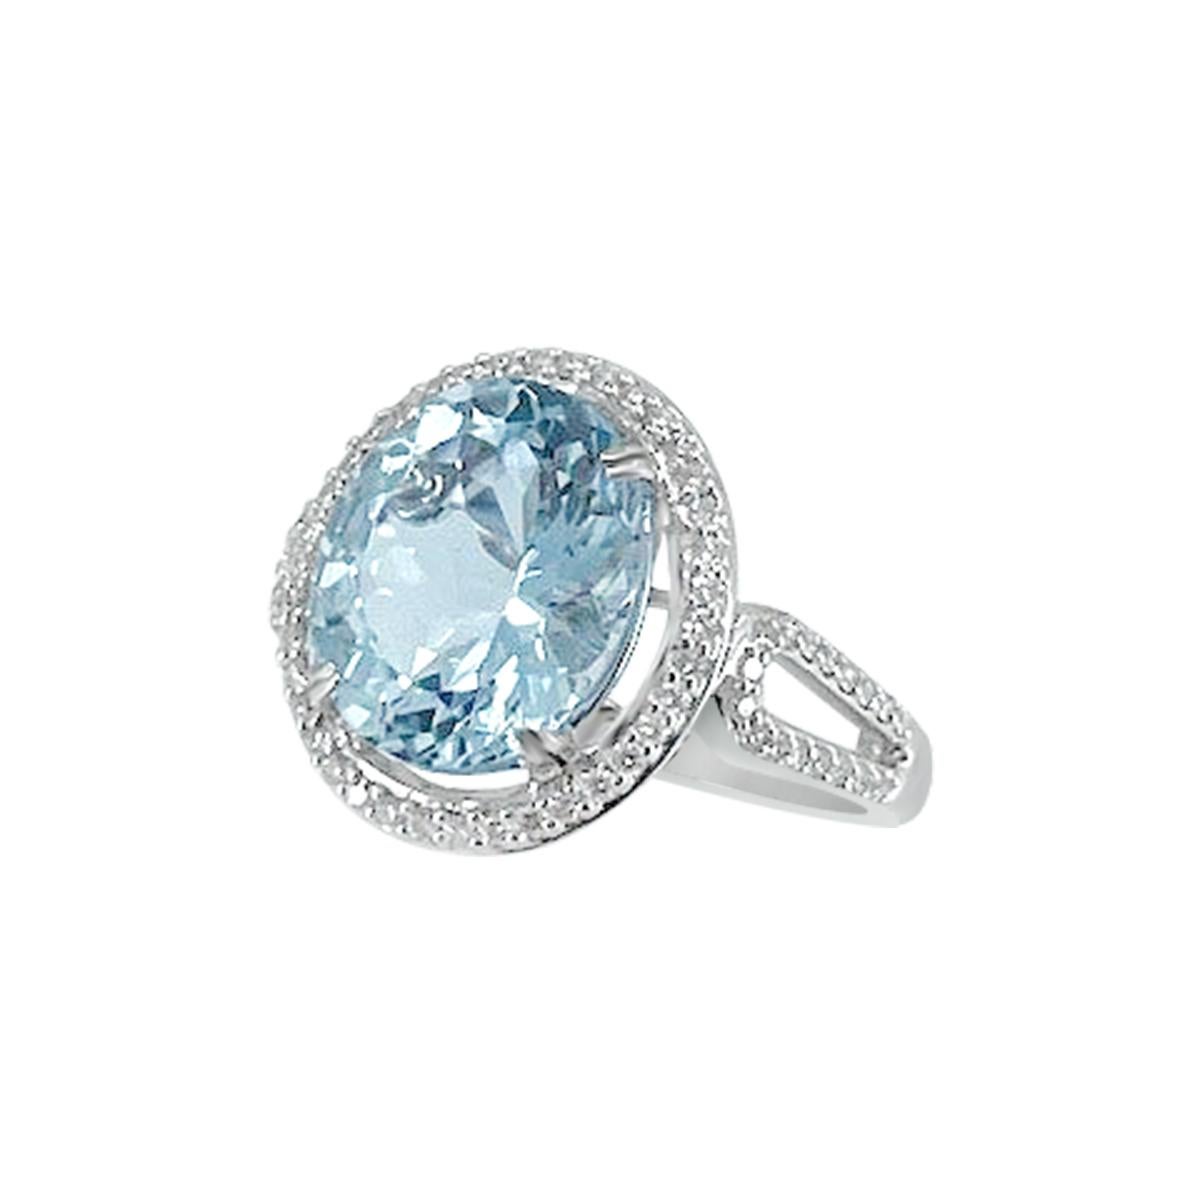 Modern 14K White Gold 4.22cts Aquamarine and Diamond Ring, Style# R3692AQ For Sale